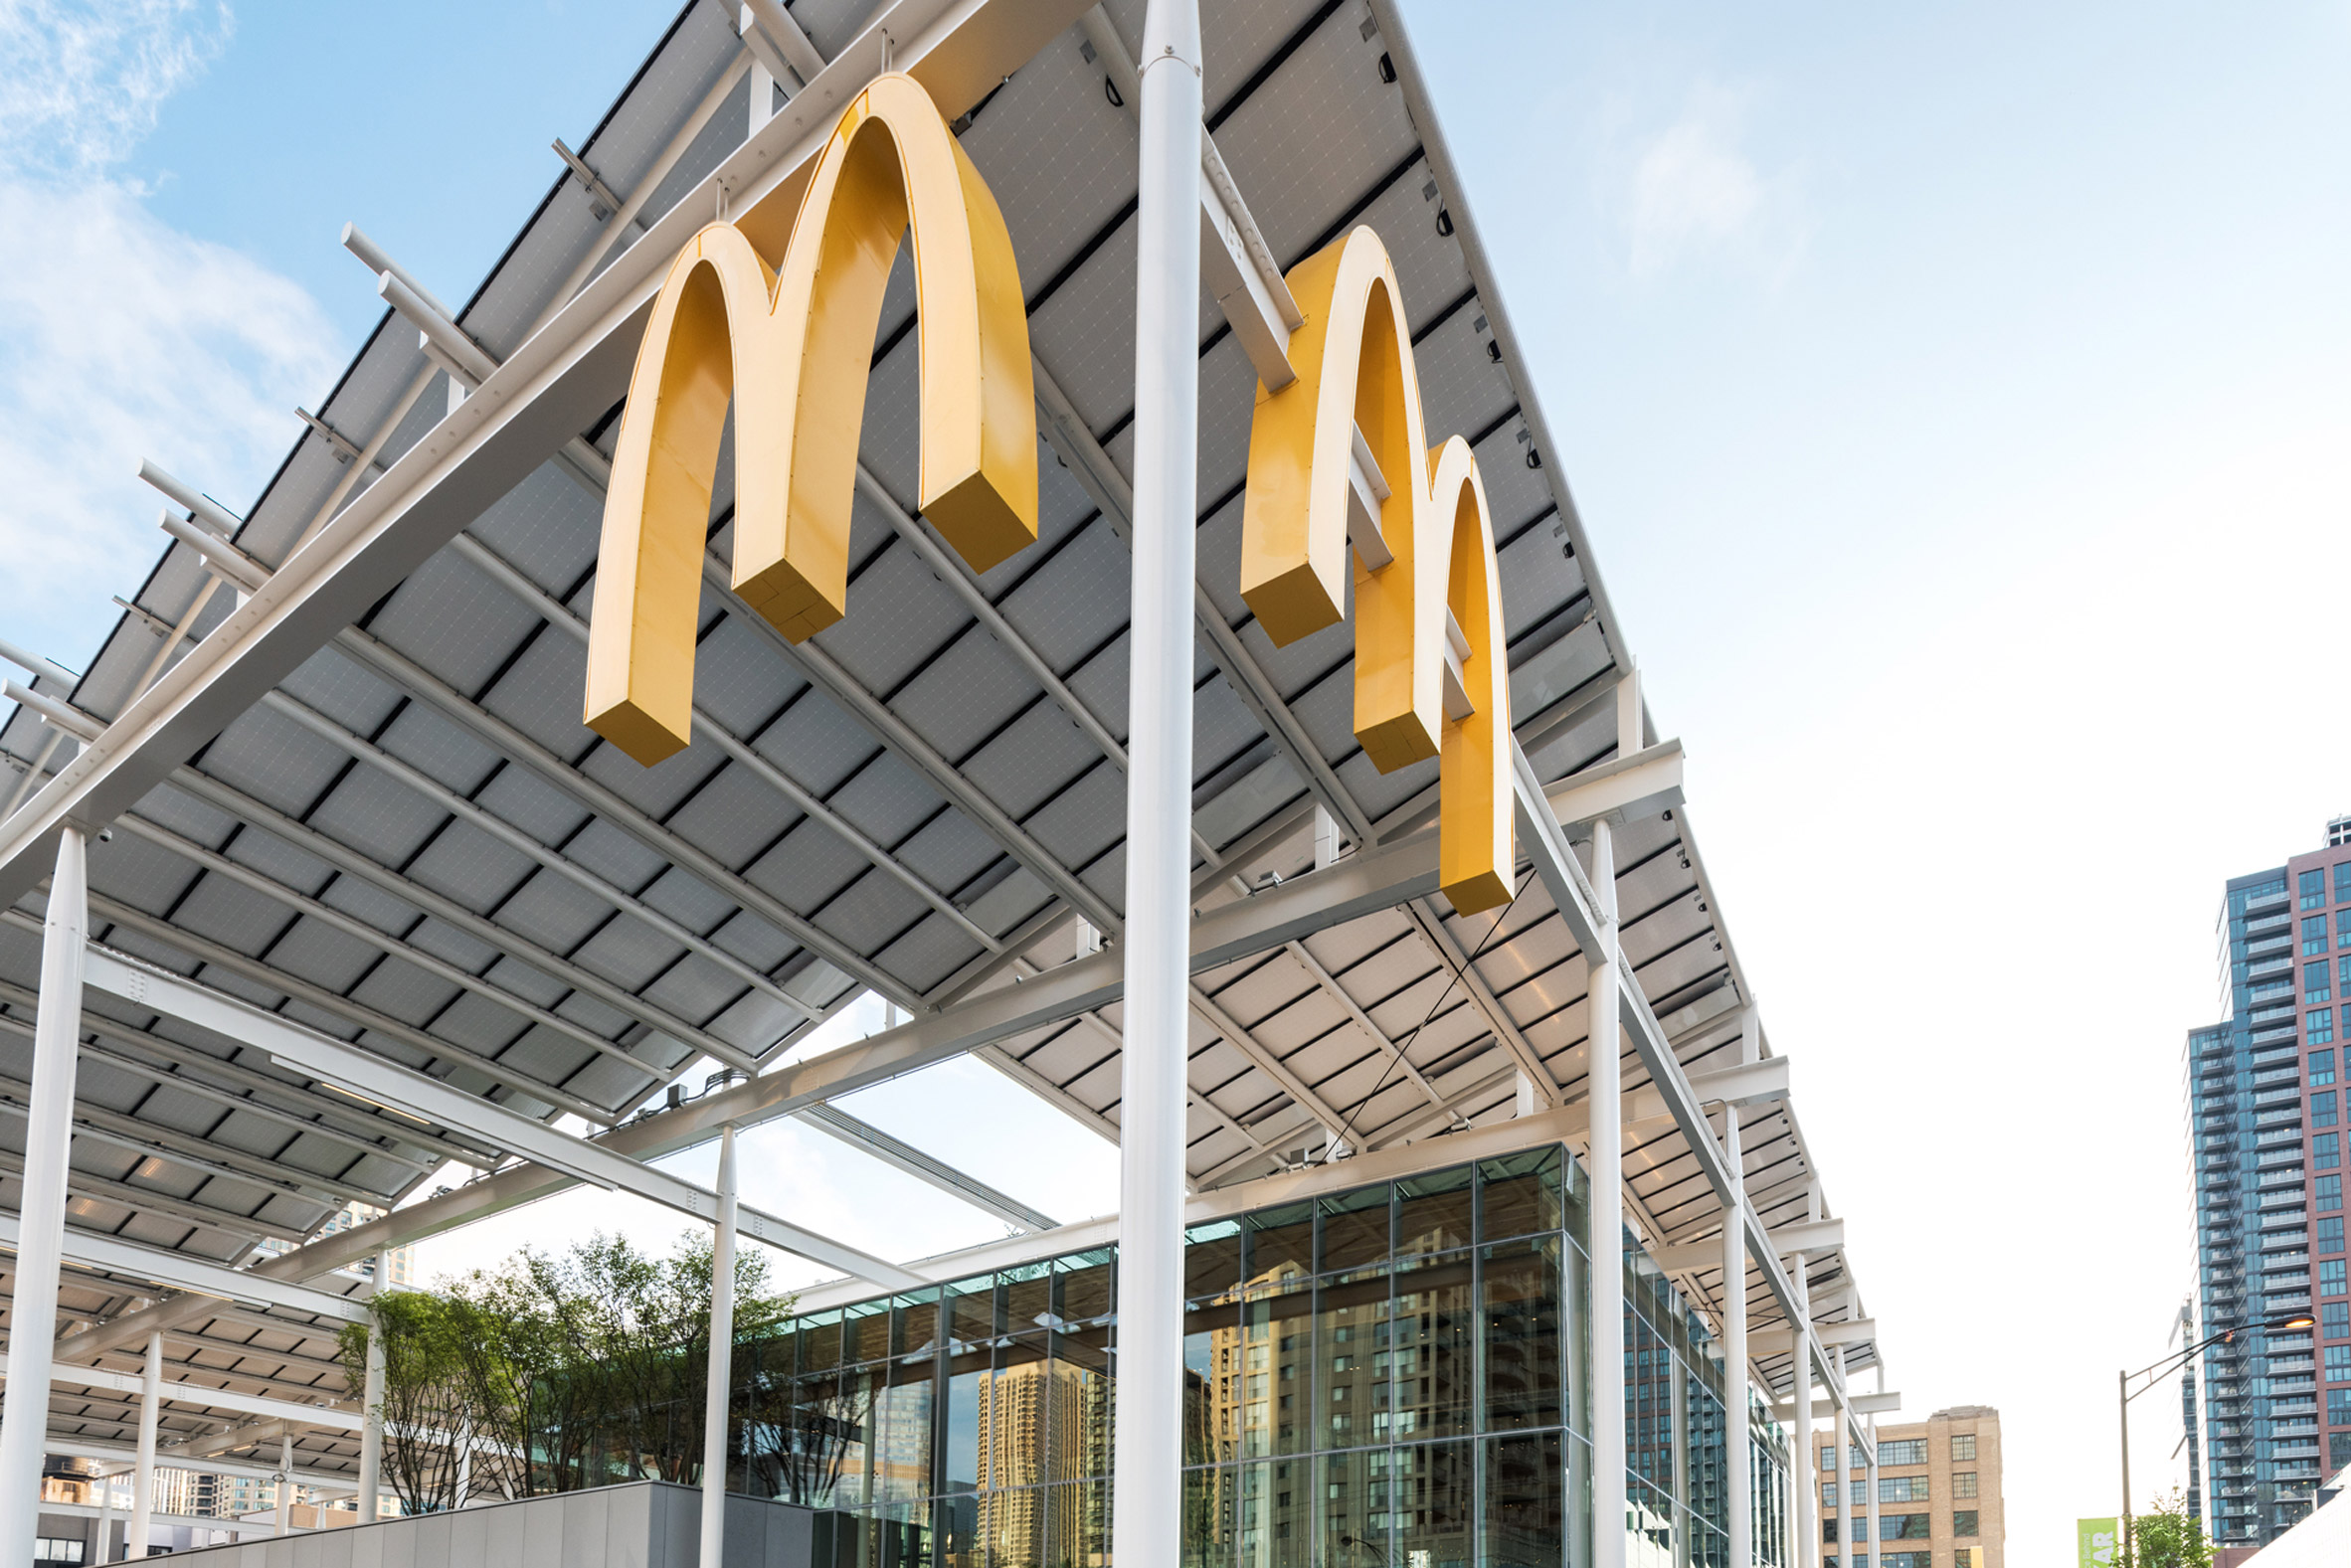 Chicago McDonald's by Ross Barney Architects draws comparisons to Apple stores